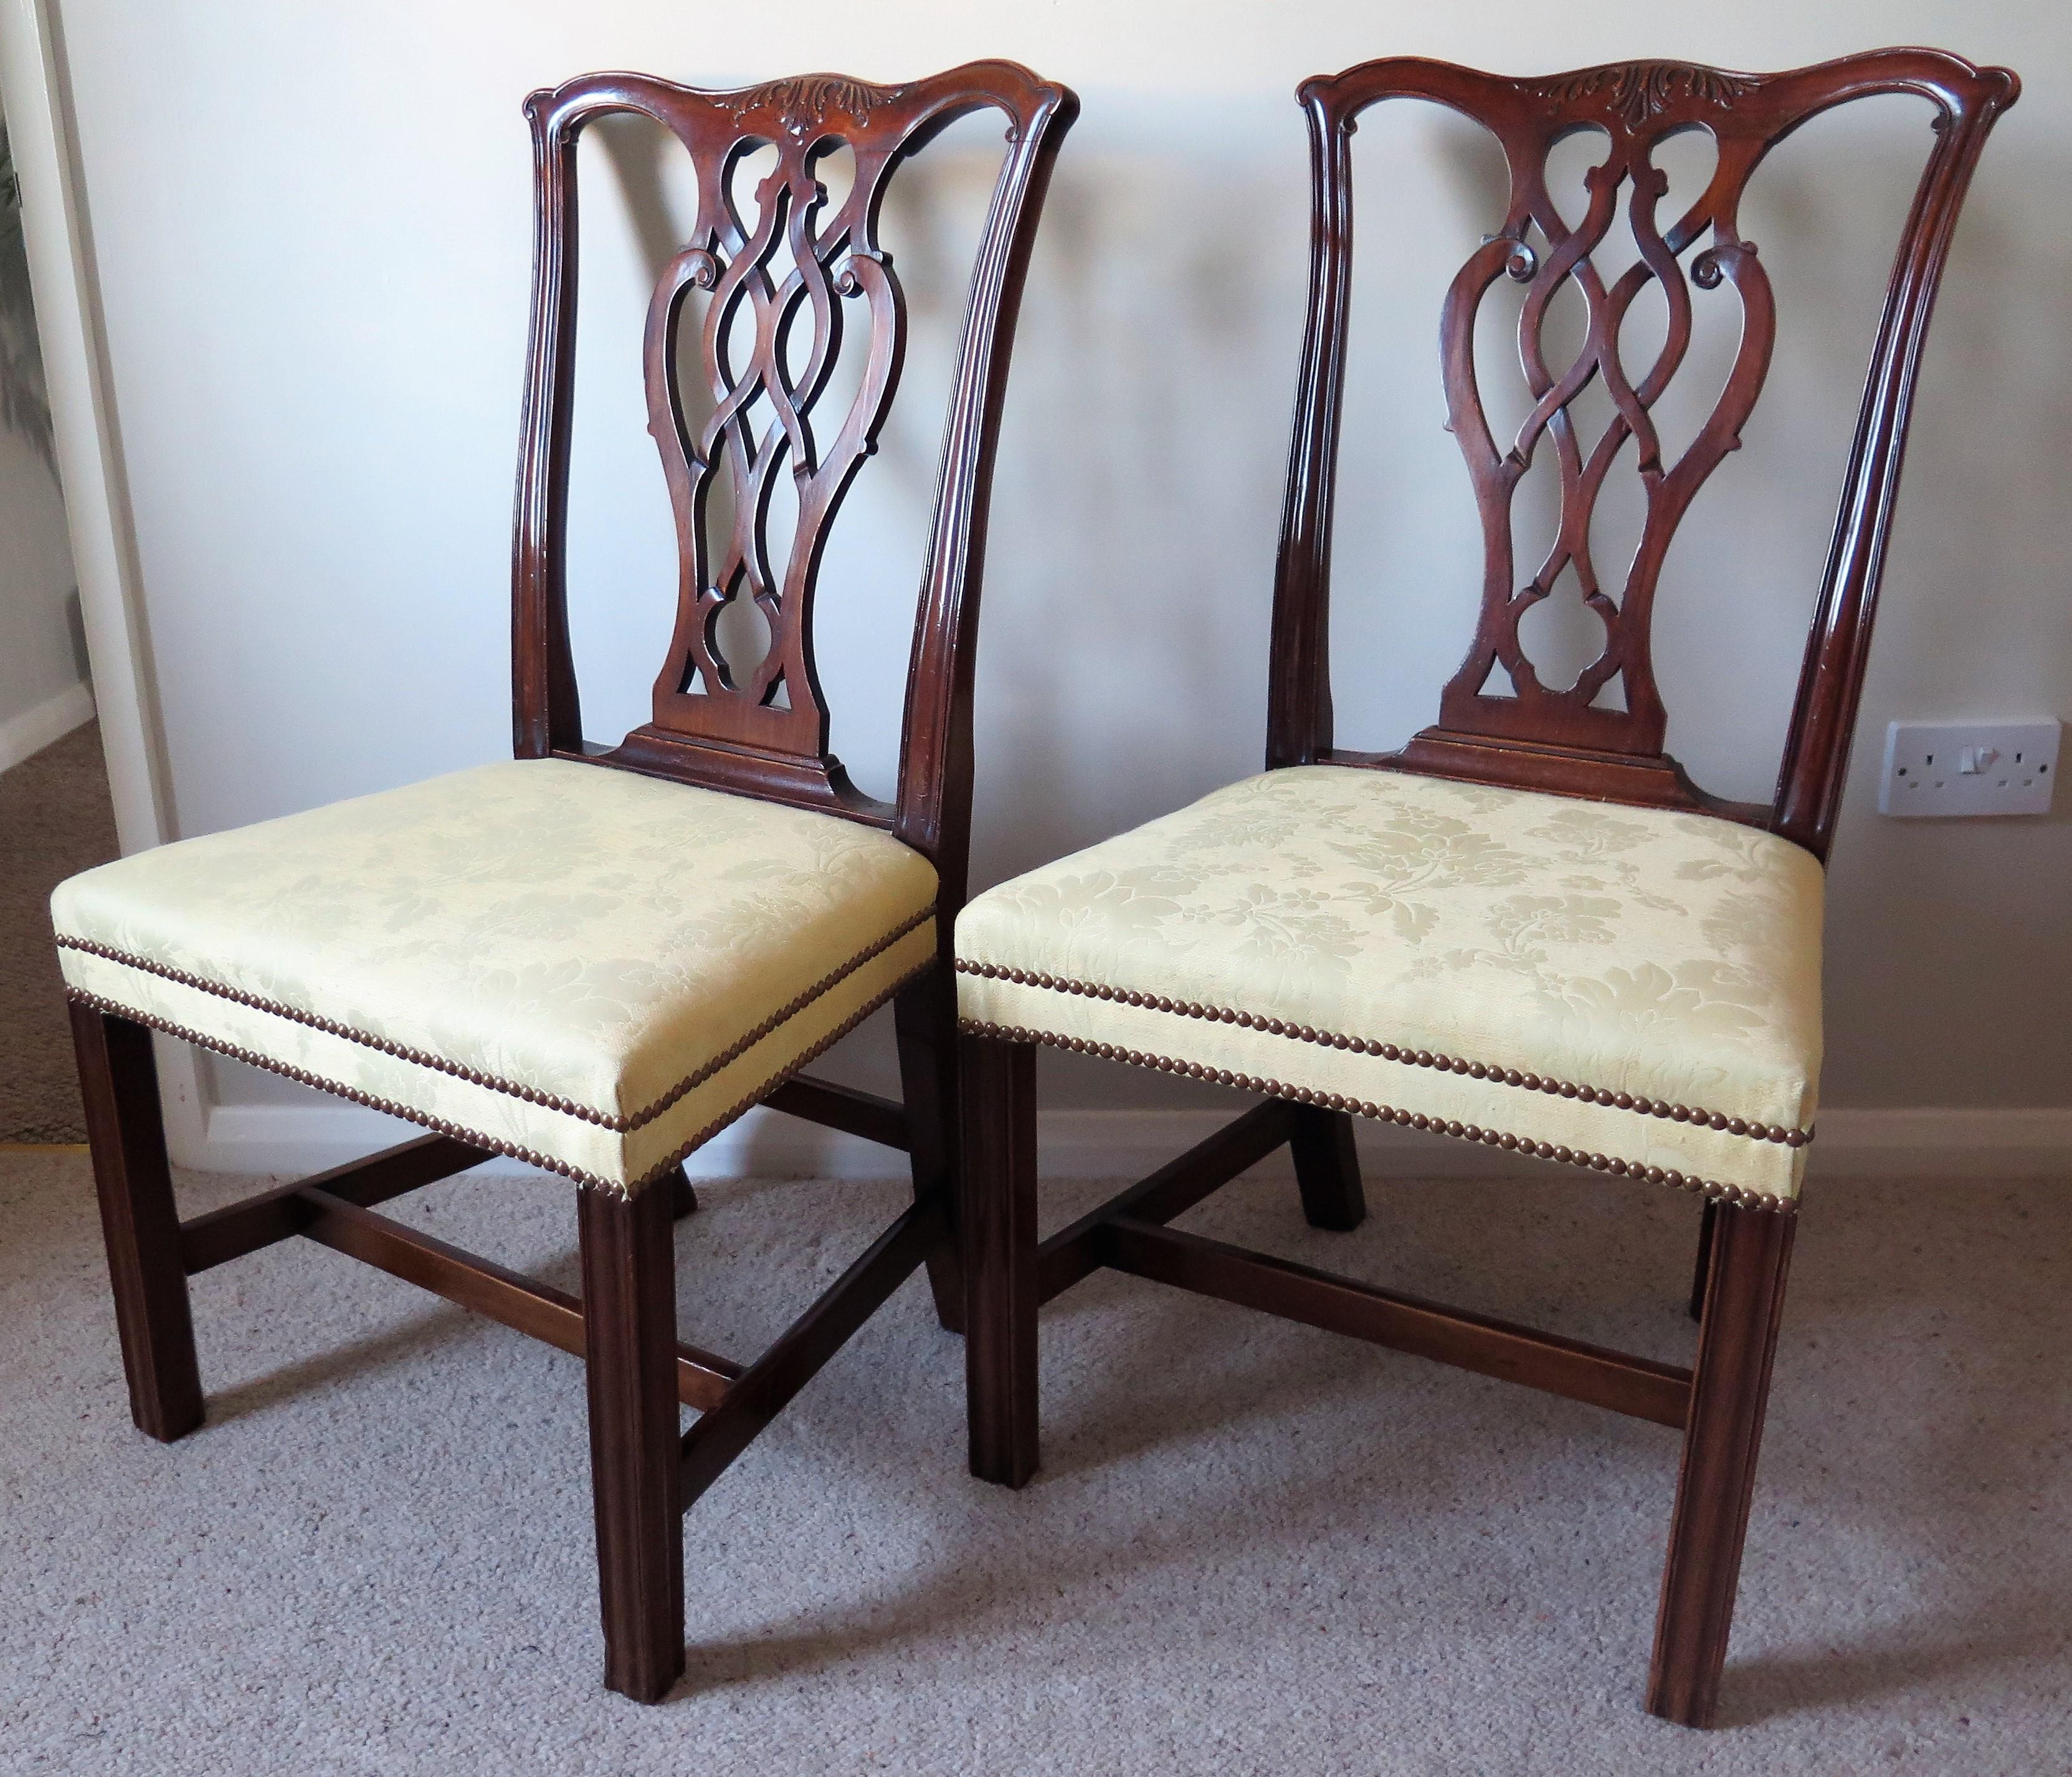 18th Century Pair of Elegant George 111 Mahogany Chippendale Chairs Reupholstered, Circa 1770